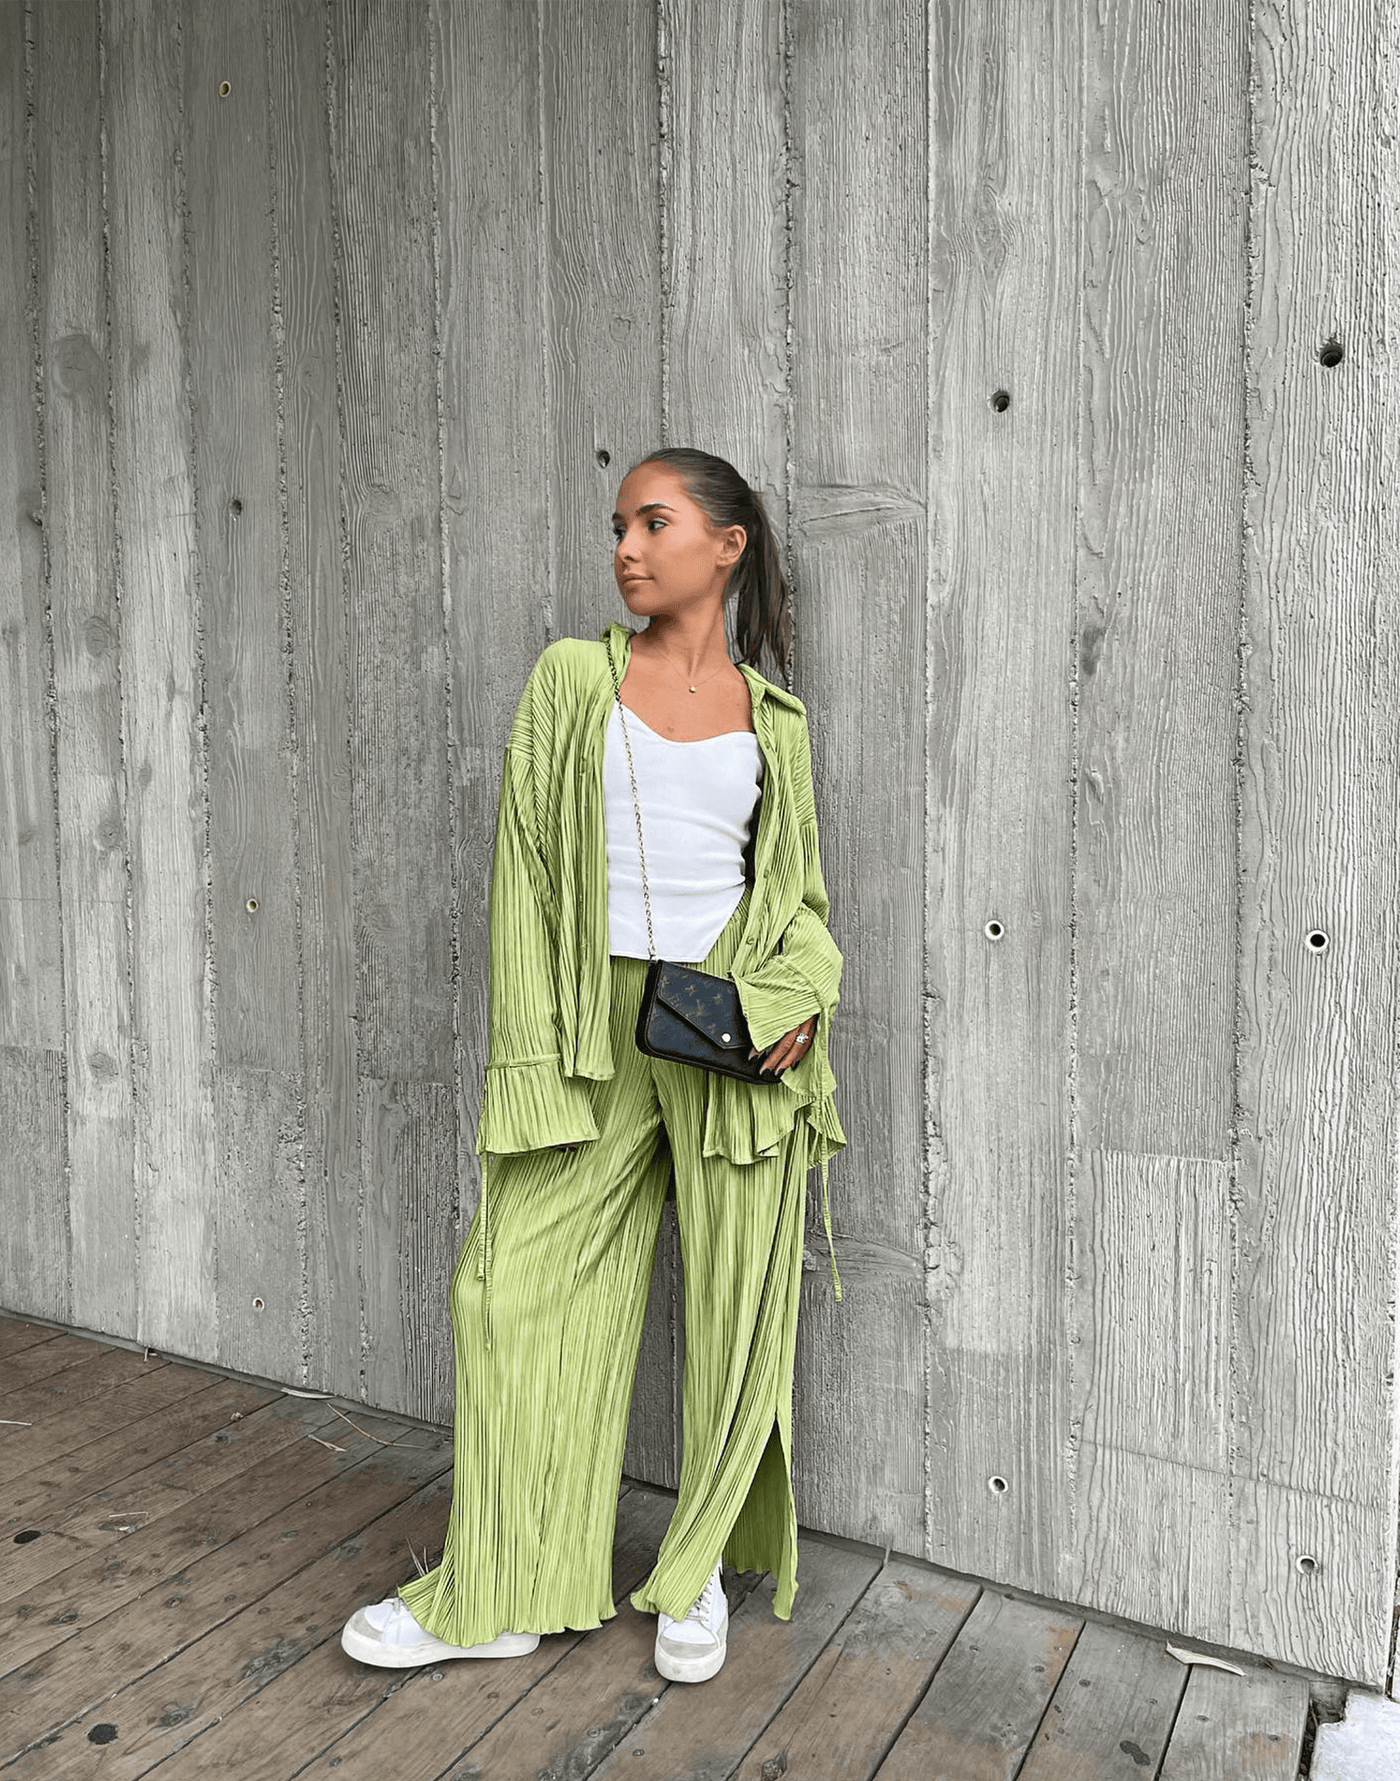 Sweet Serenity Pants (Green) - Green Pleated High Waisted Pants - Women's Pants - Charcoal Clothing